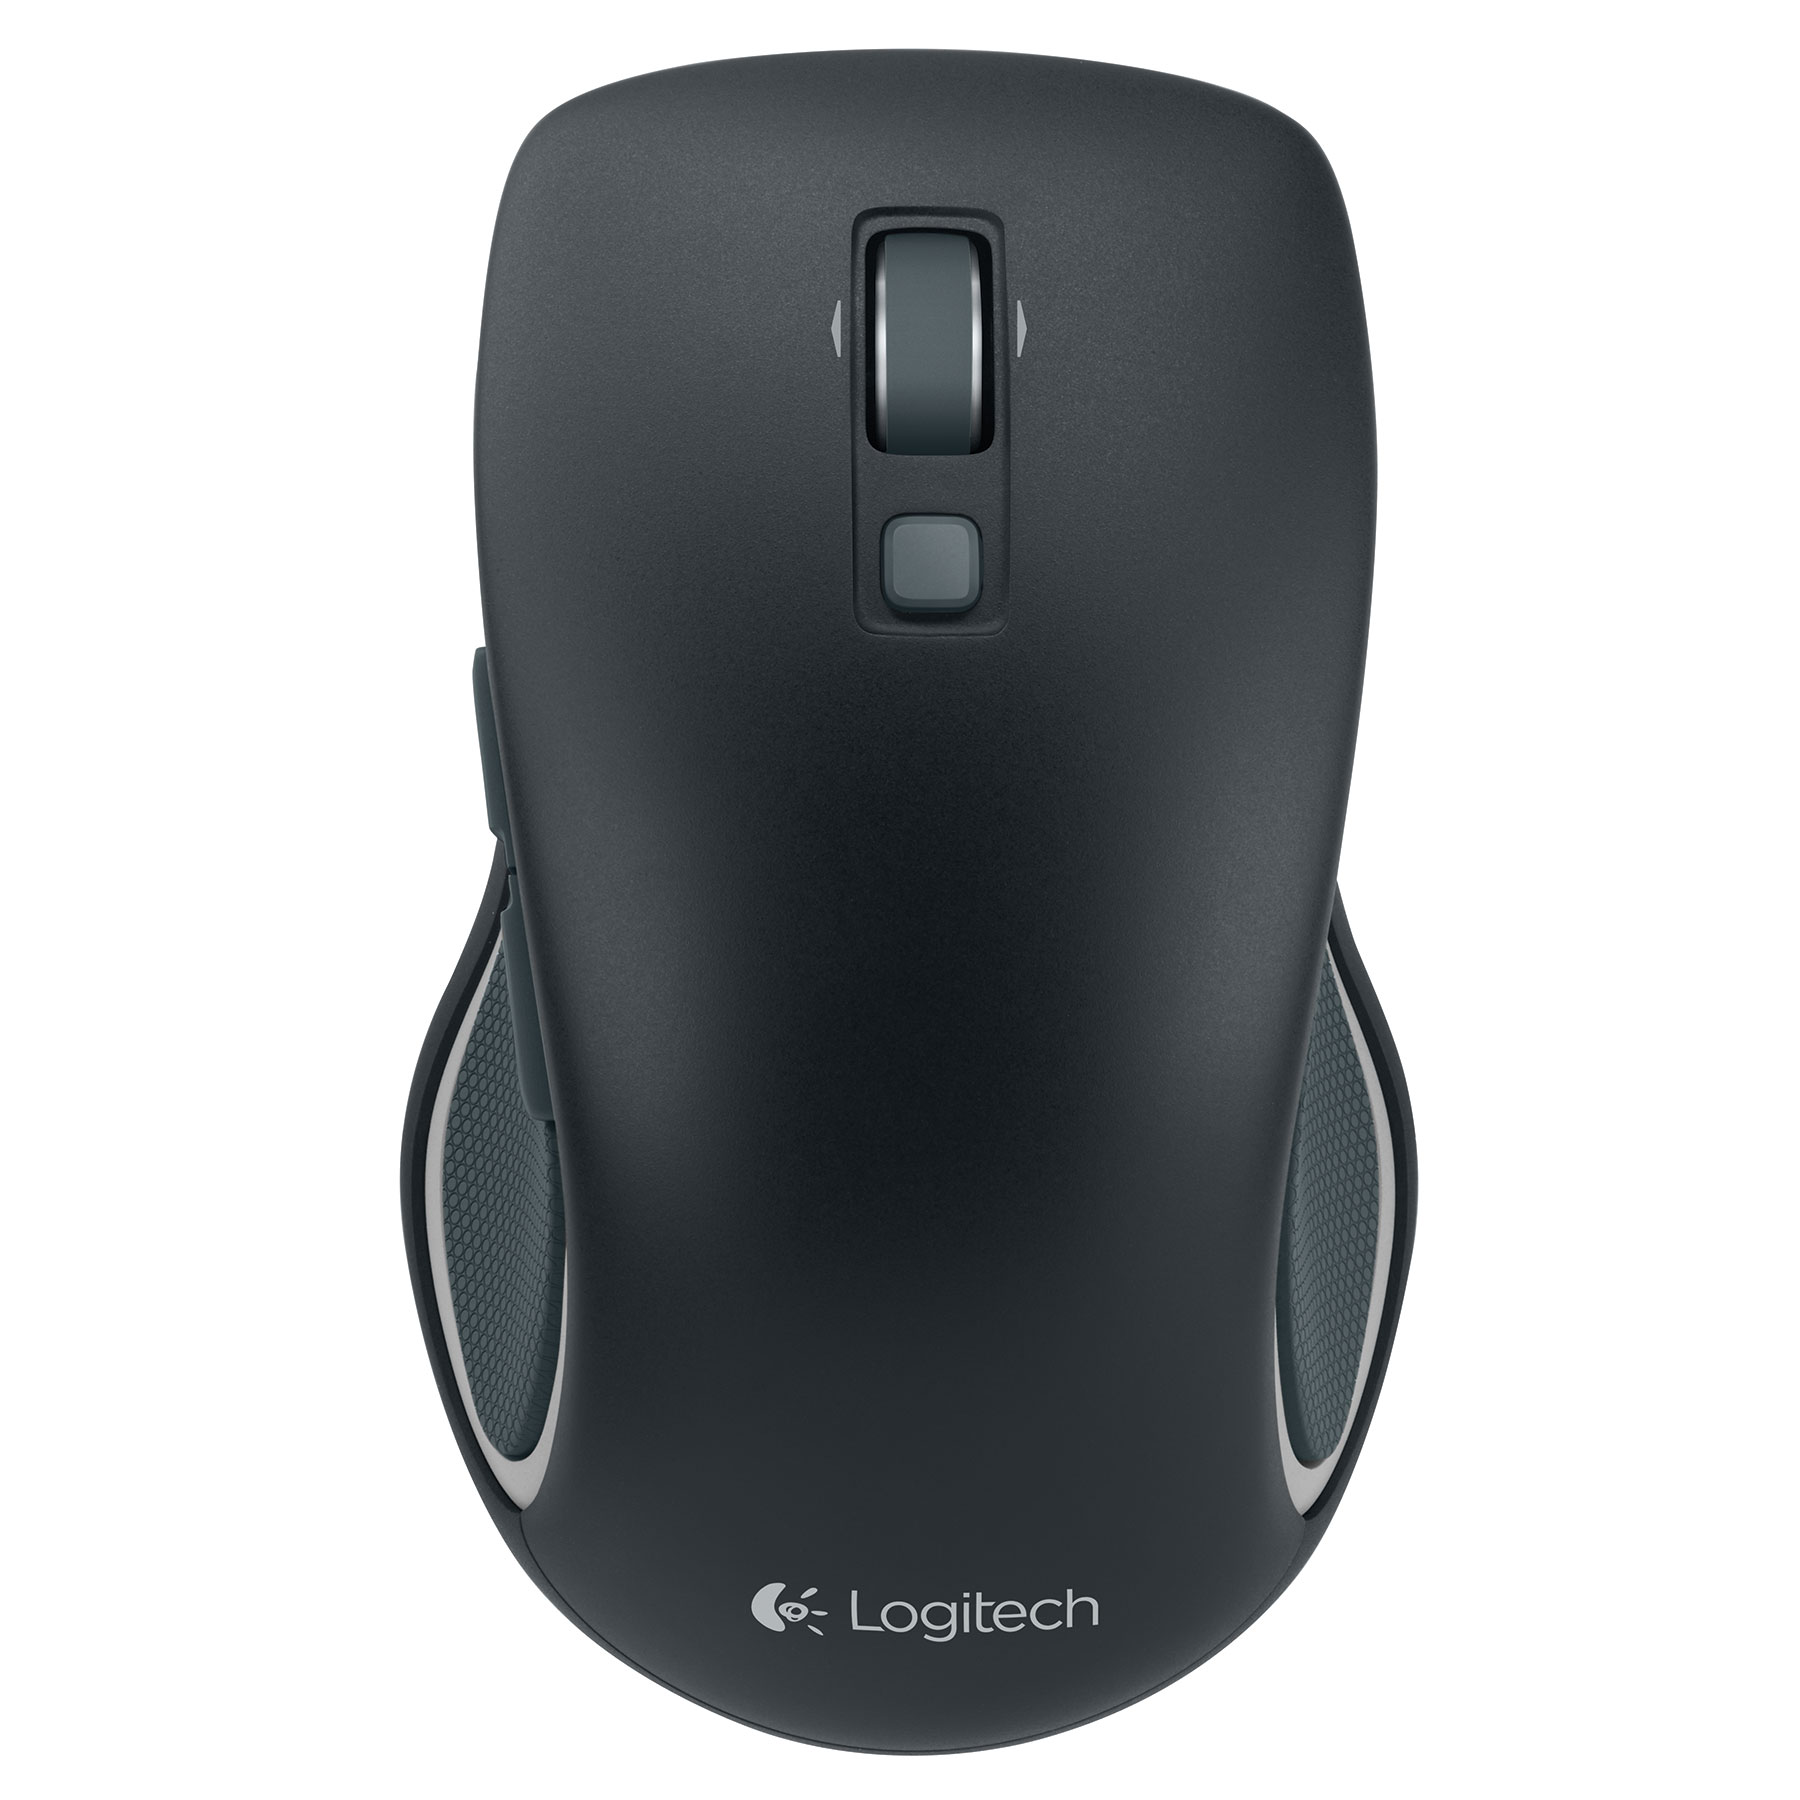 Mouse Logitech M560 Wireless Occident Packaging Black title=Mouse Logitech M560 Wireless Occident Packaging Black